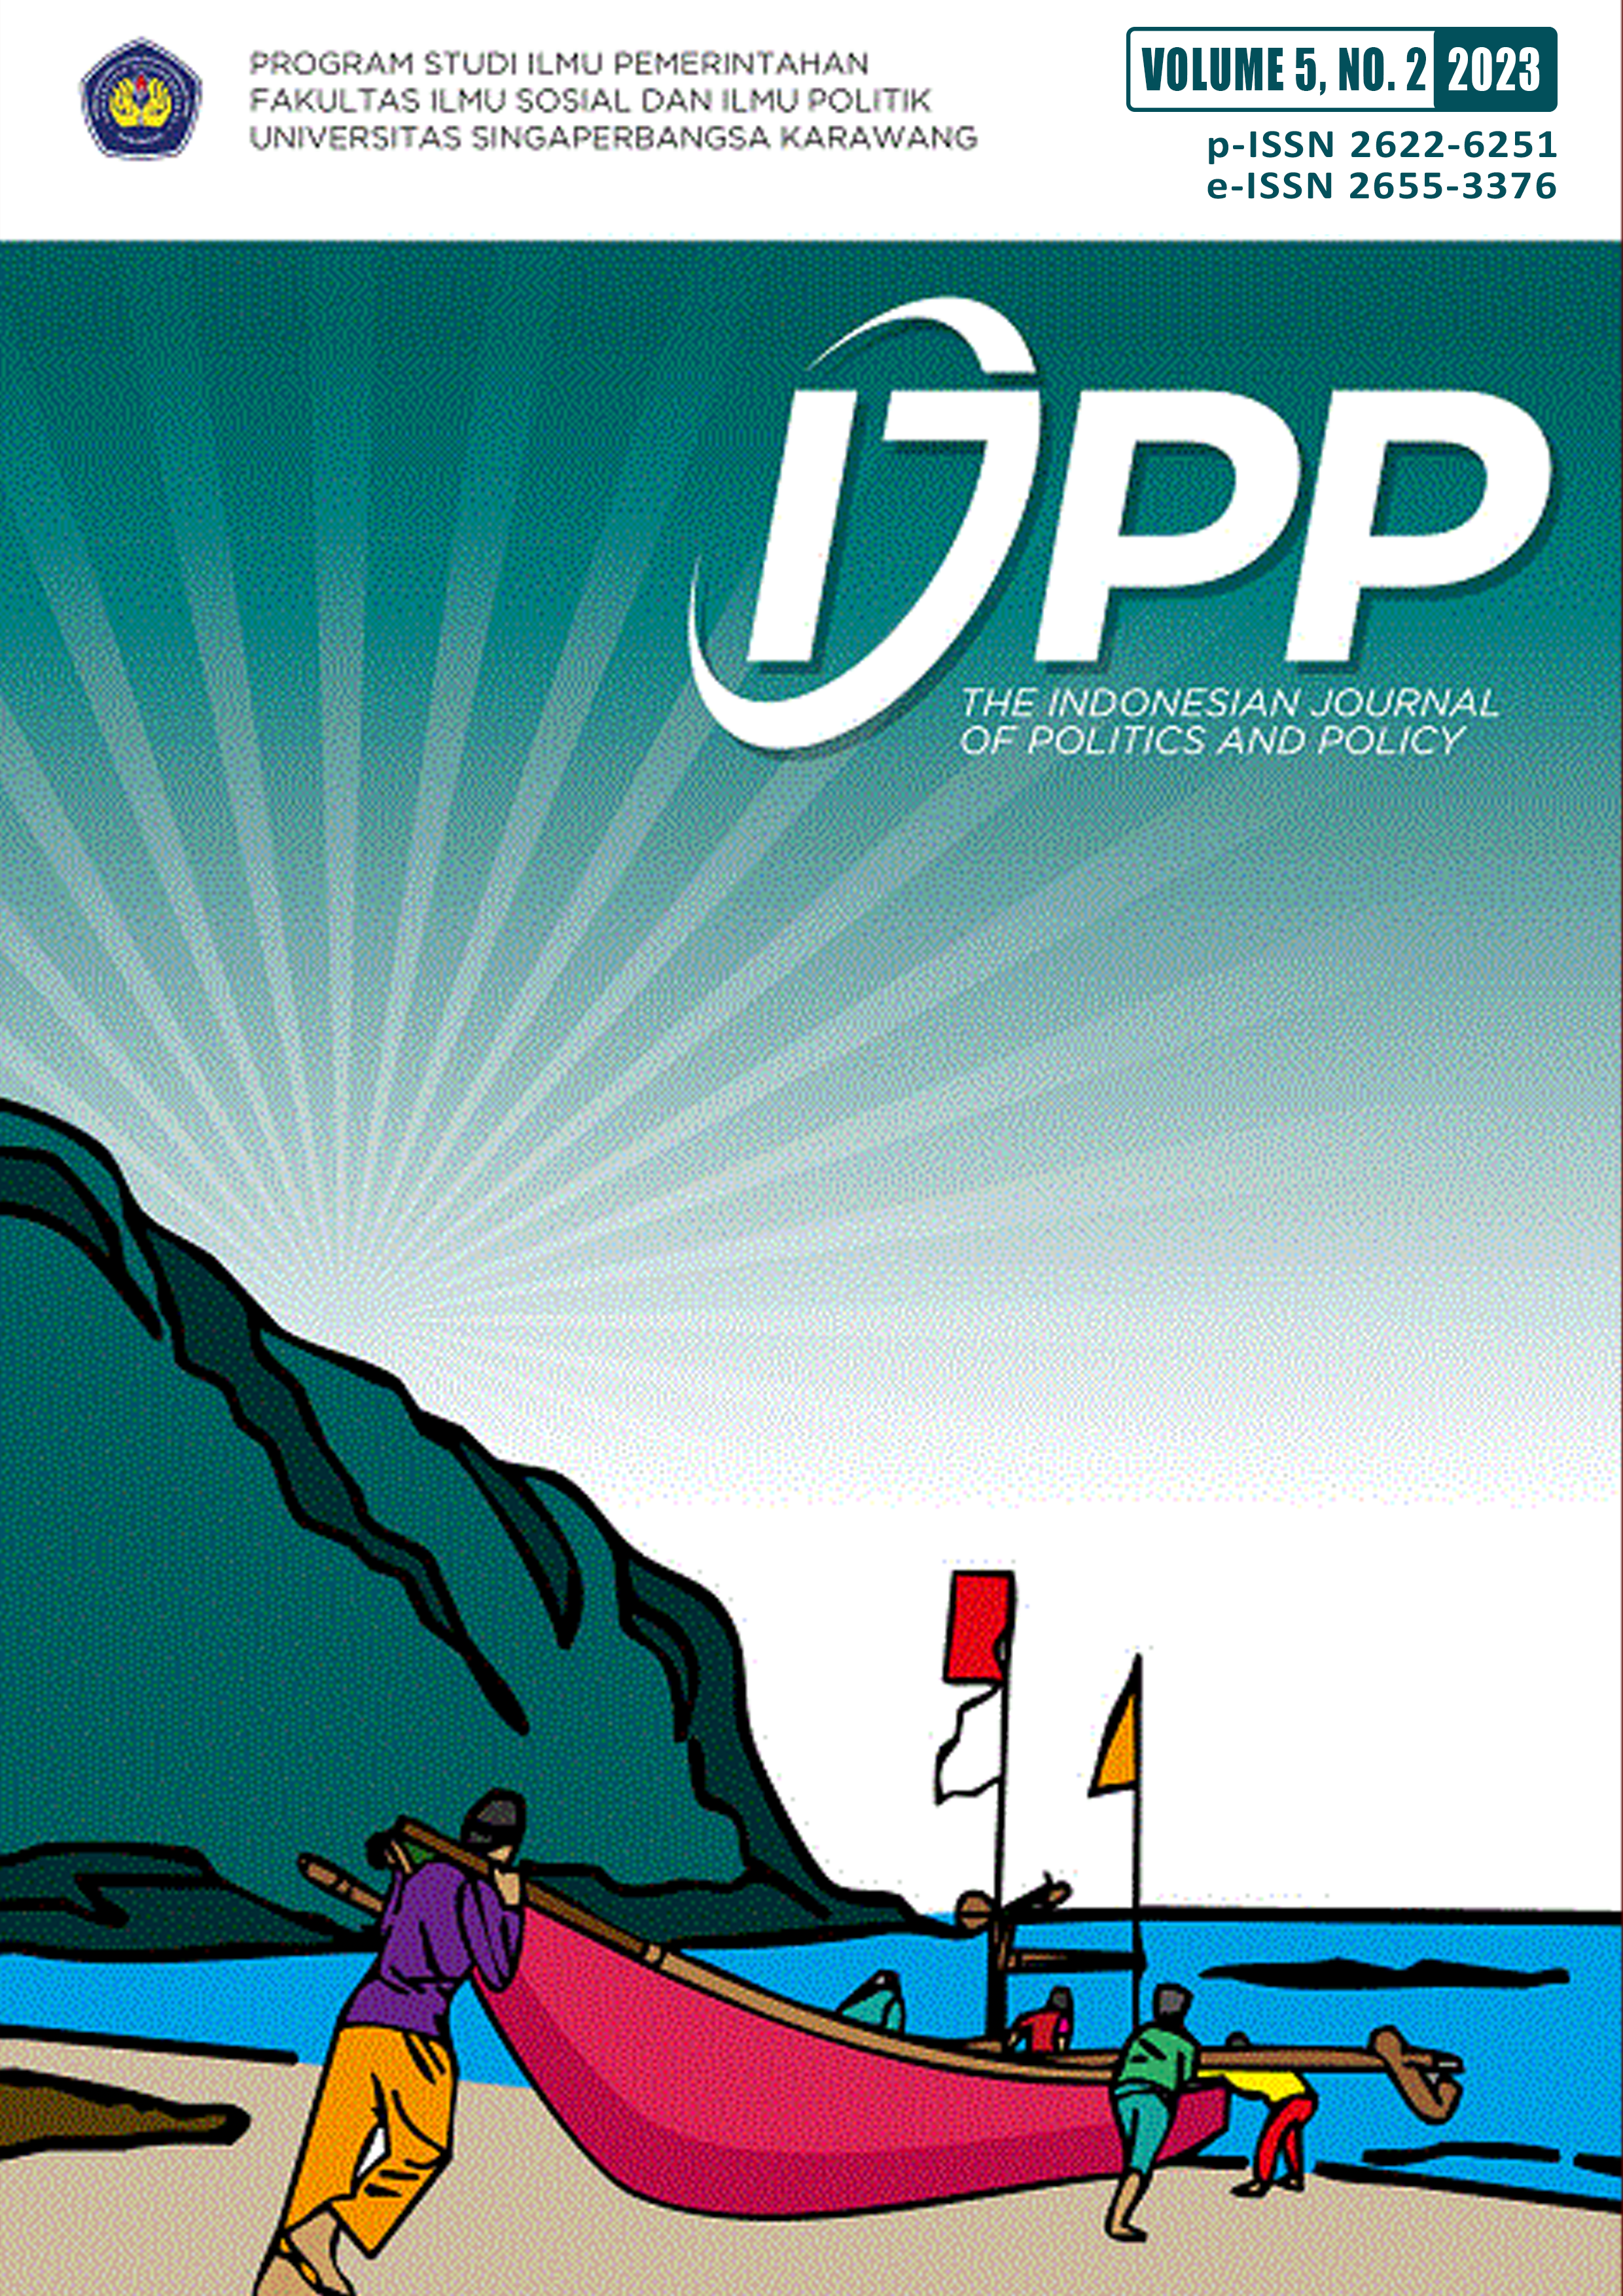 					View Vol. 5 No. 2 (2023): THE INDONESIAN JOURNAL OF POLITICS AND POLICY
				